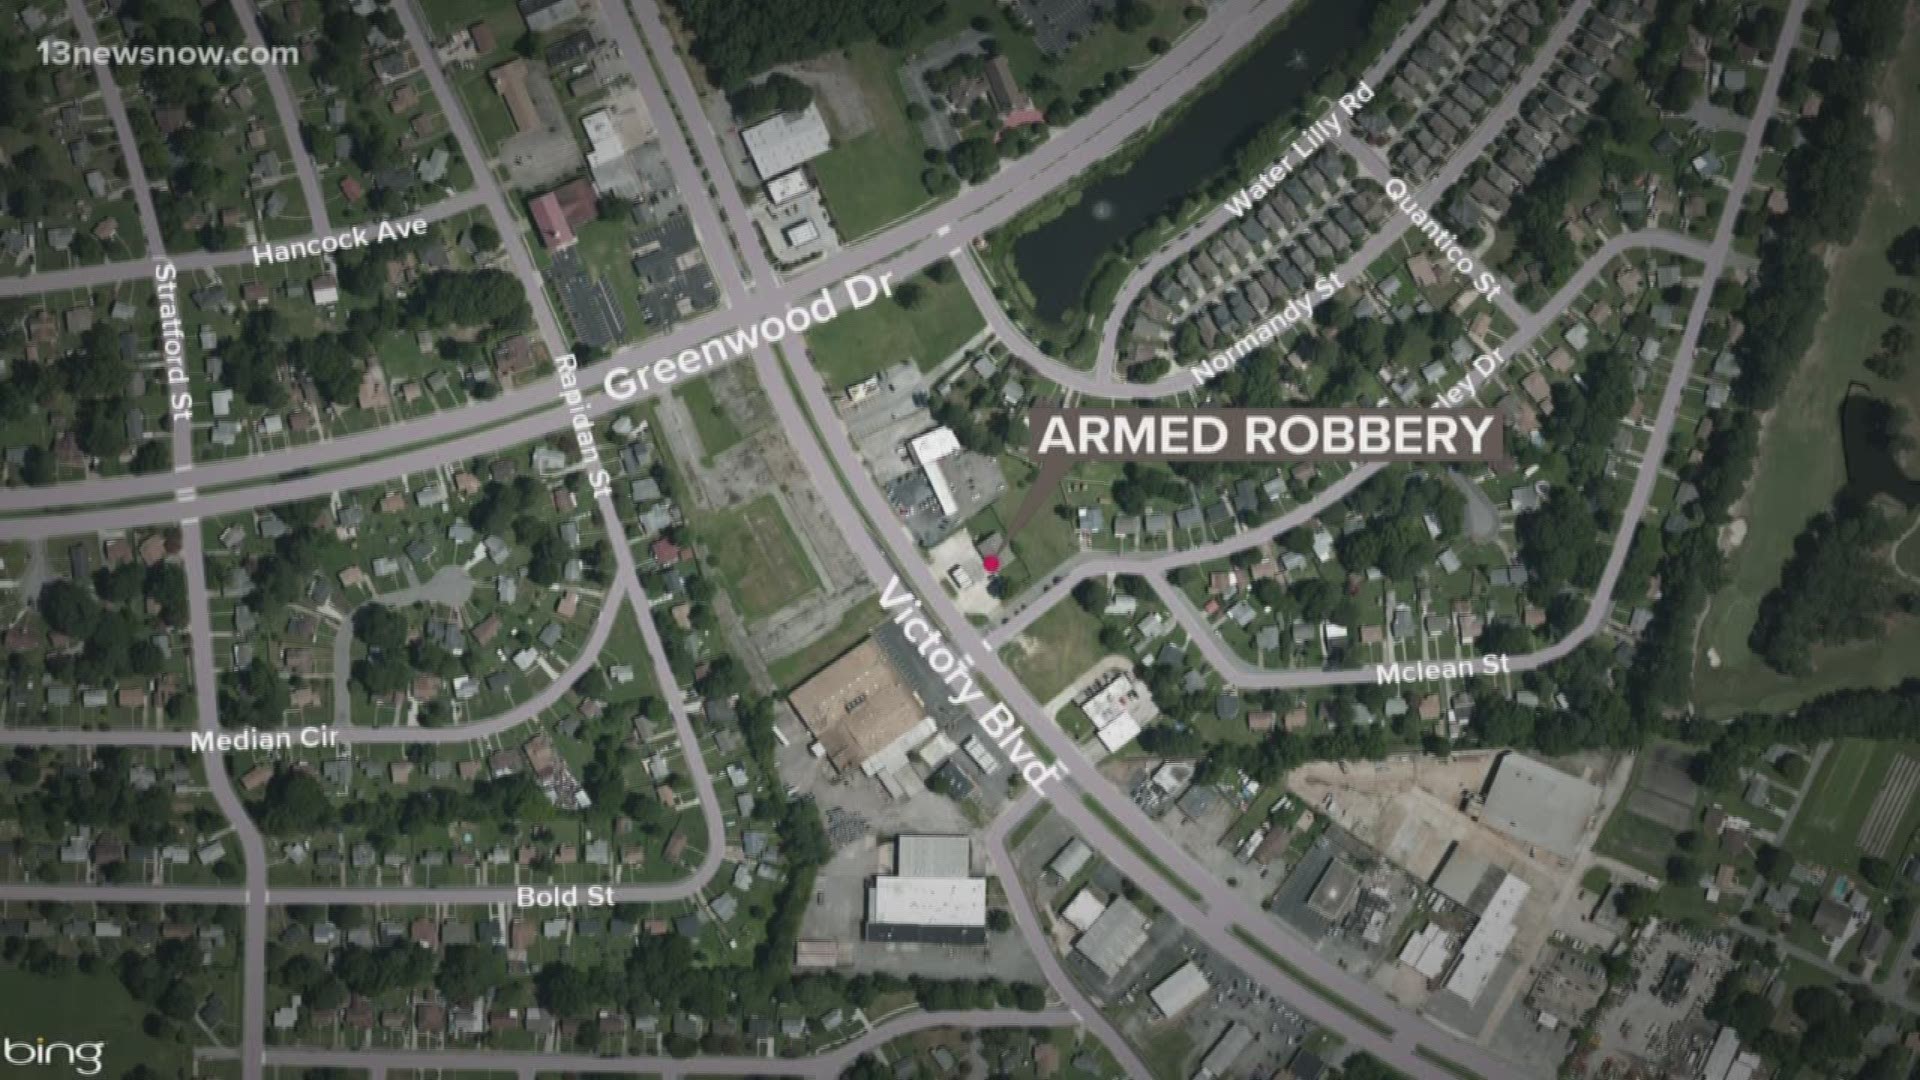 Officers are working to track down two men who robbed a convenience store in Portsmouth armed with a large knife.